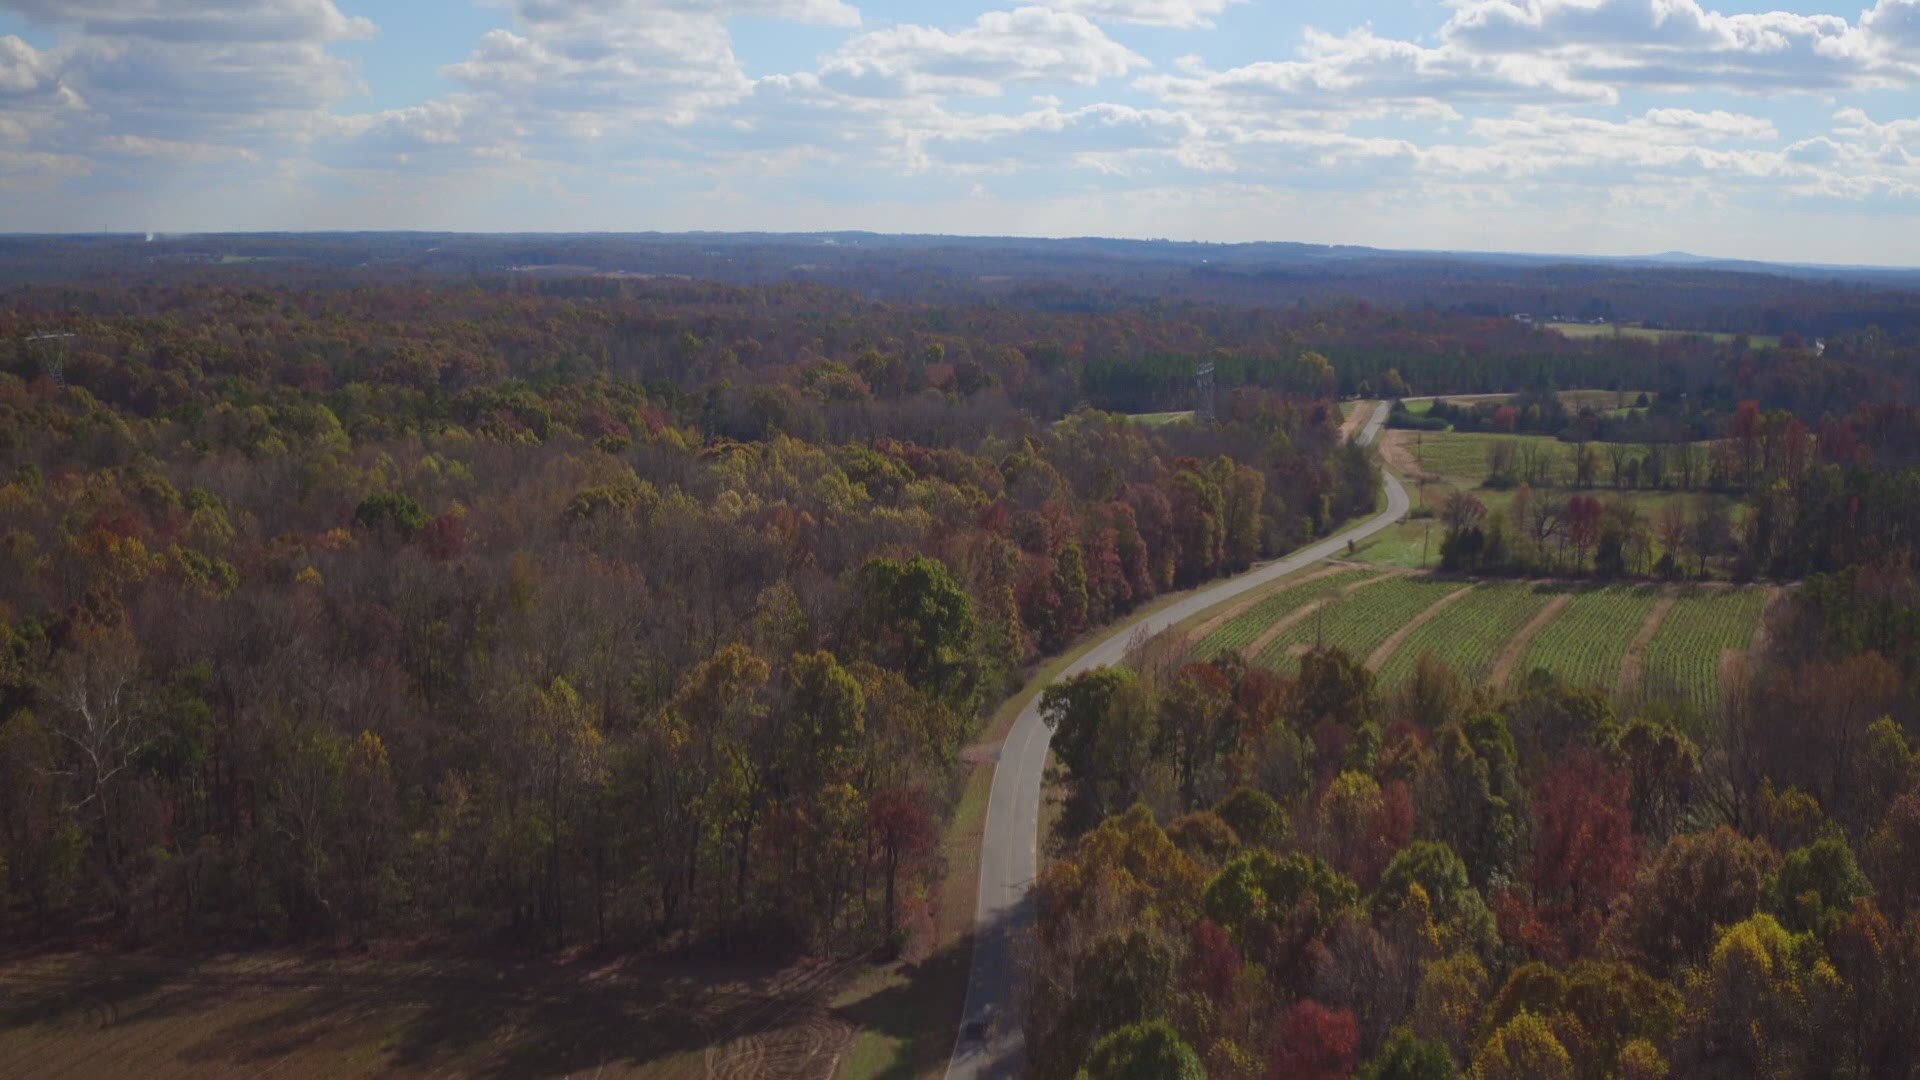 A bird's eye view of the Guilford-Randolph megasite in the Triad.